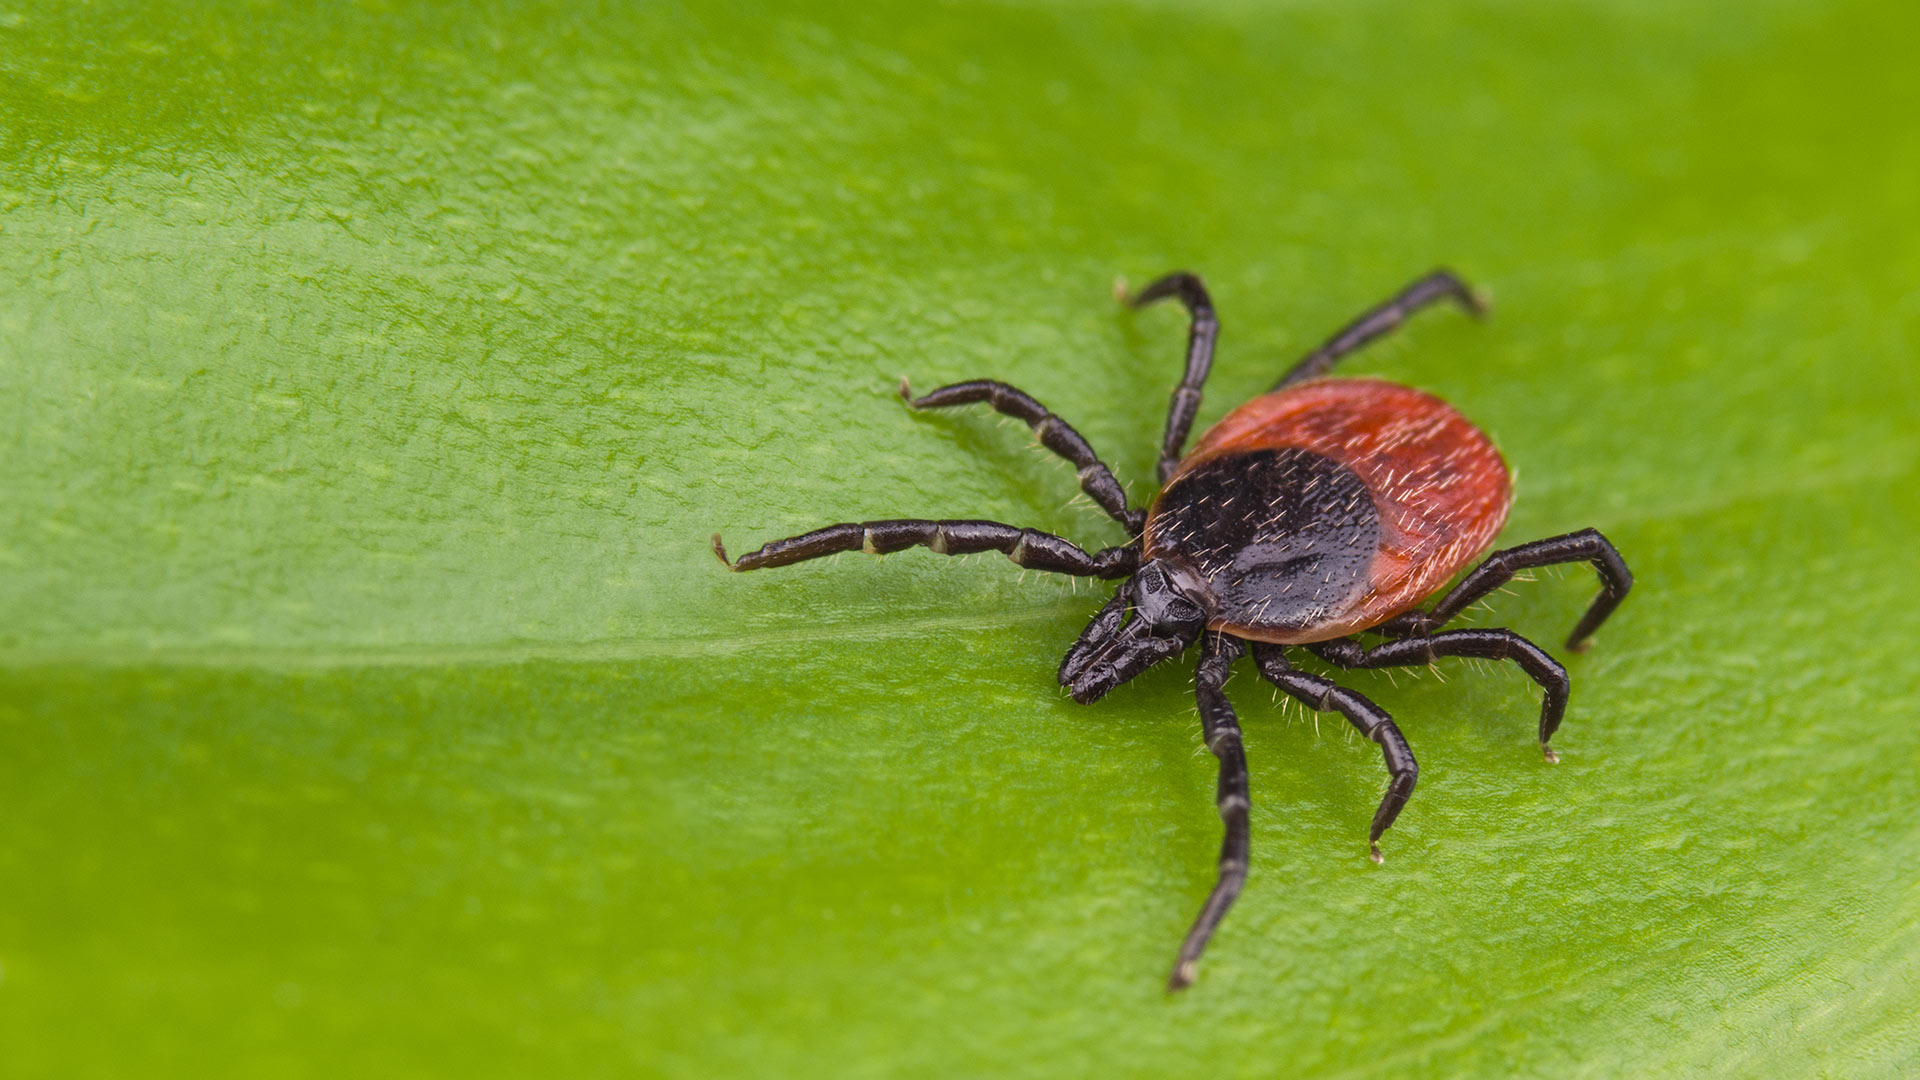 It’s Tick Season in Texas - Protect Yourself With These Tips